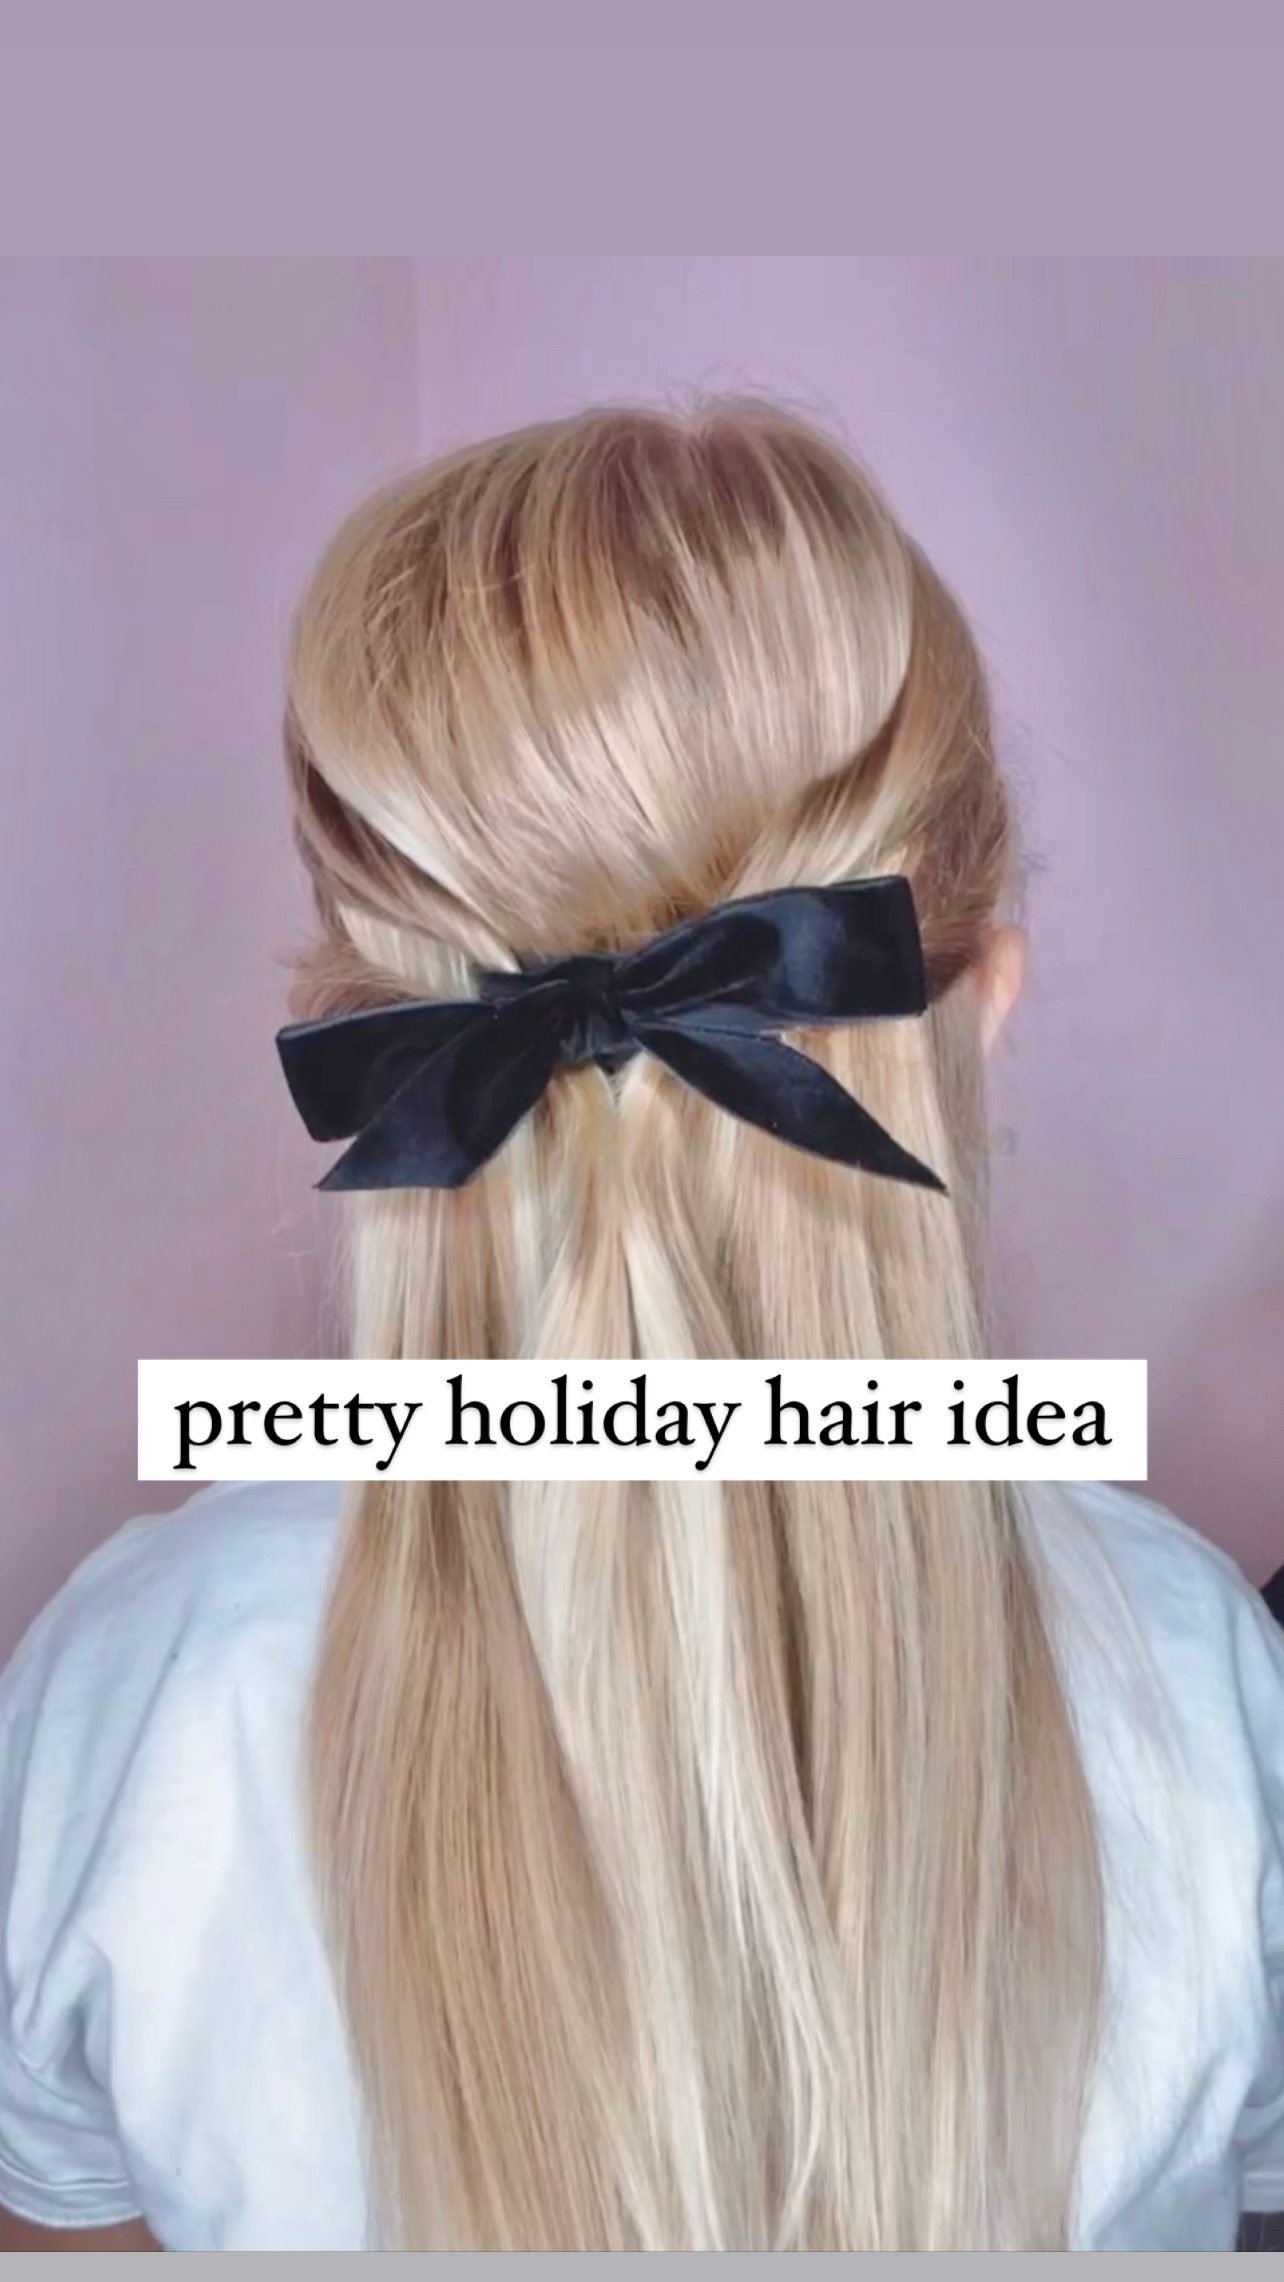 Cheap and Cute Hairstyle  Ribbon hairstyle, Hair styles, Hairstyle